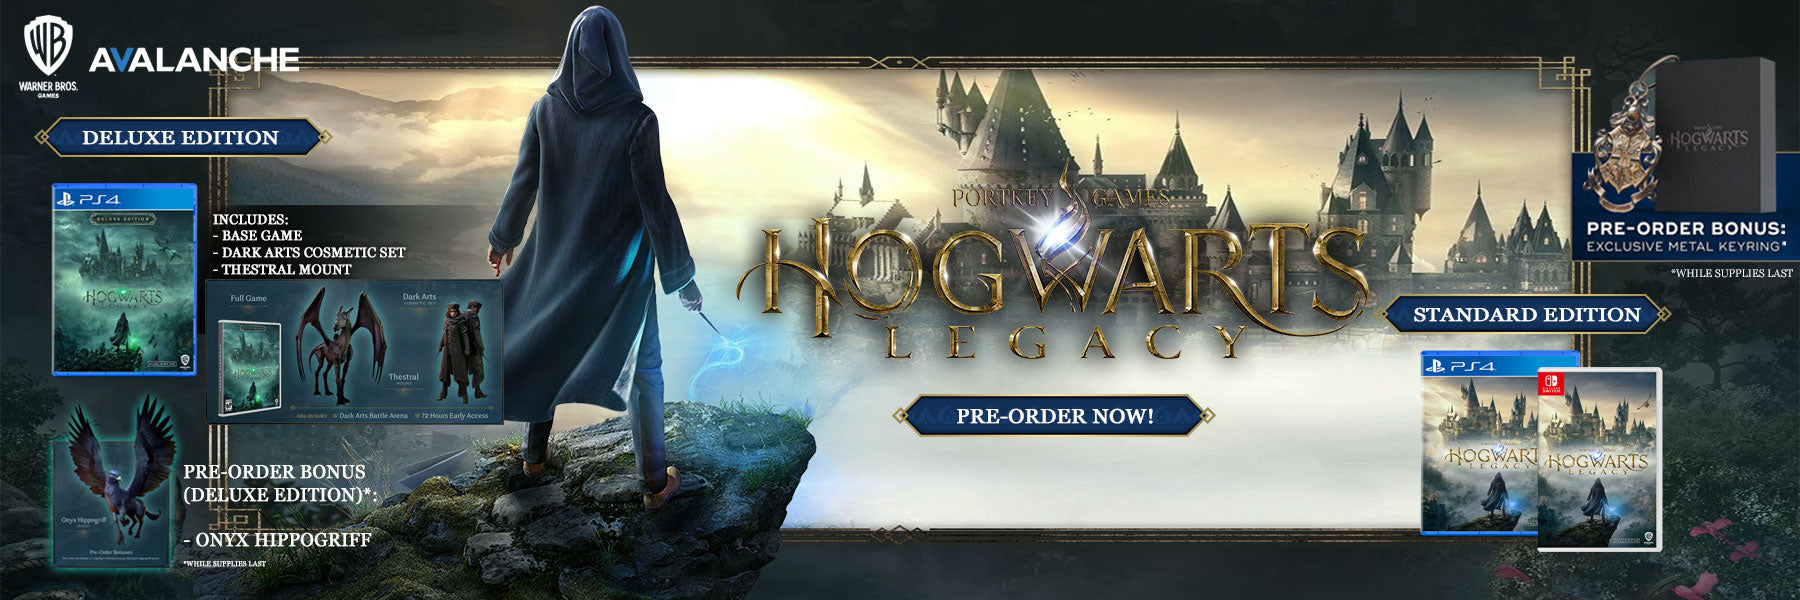 Hogwarts Legacy Deluxe - PlayStation 4